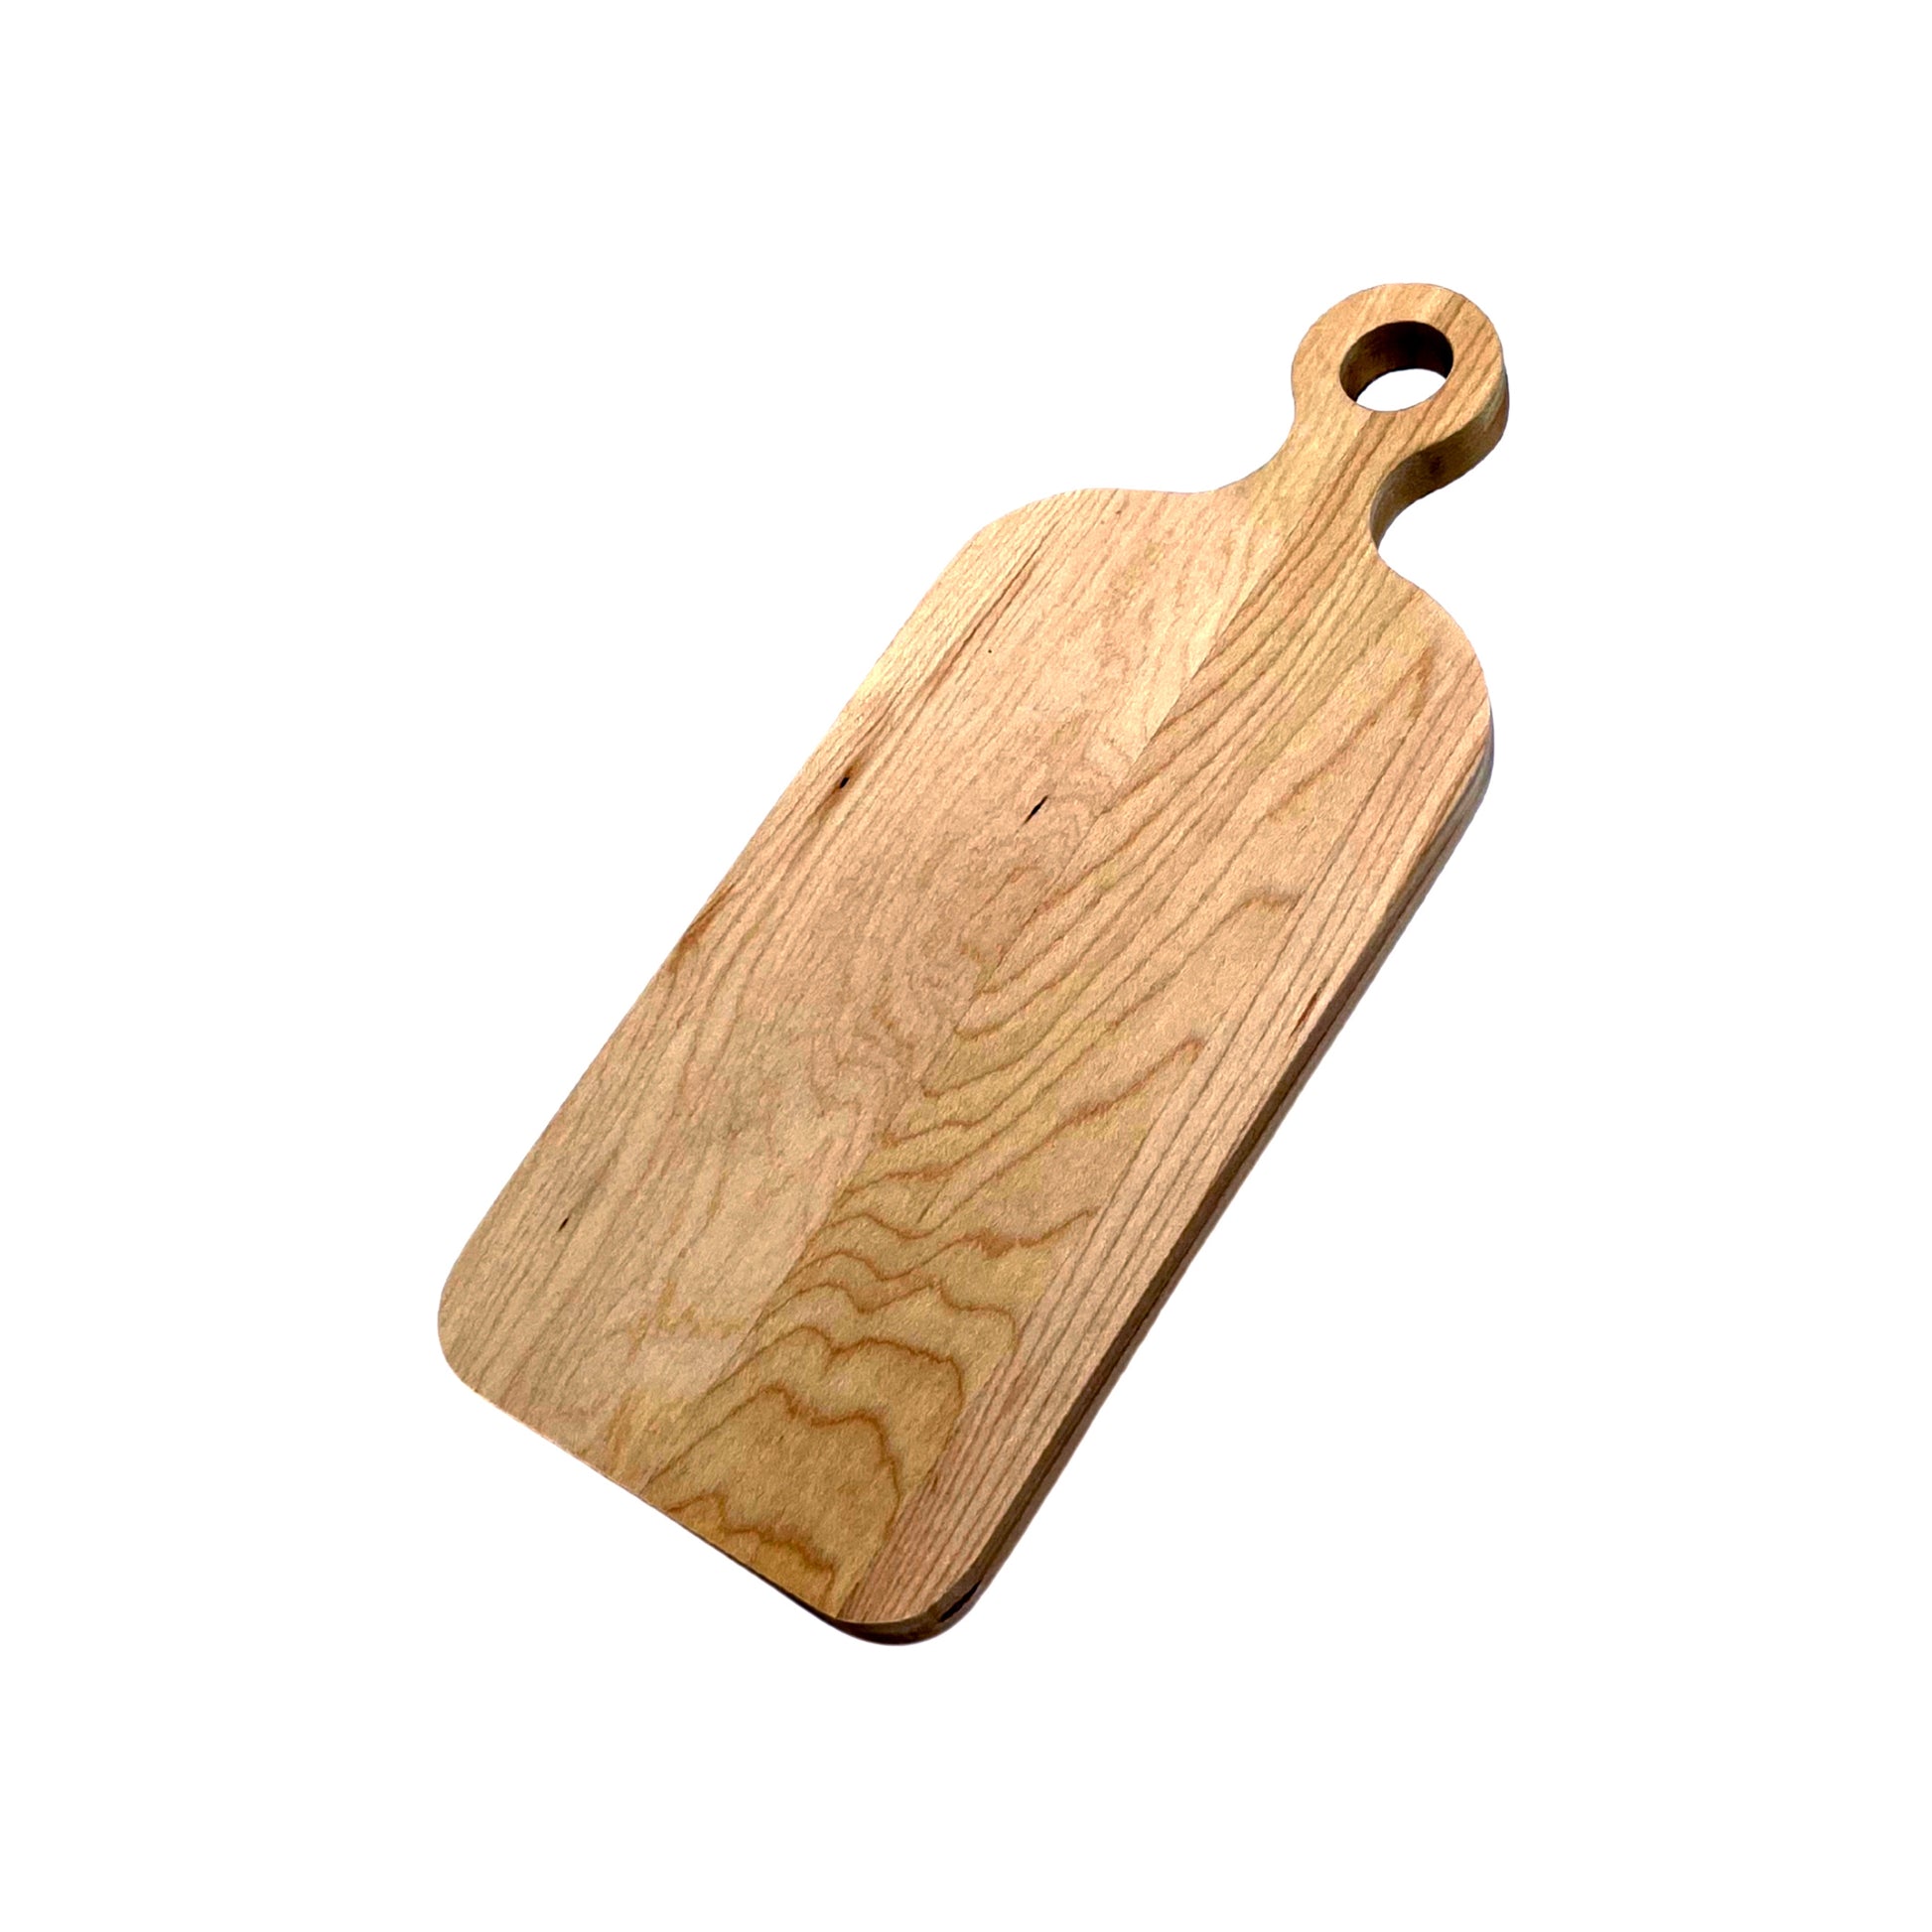 Maple Paddle Board-12" x 5"